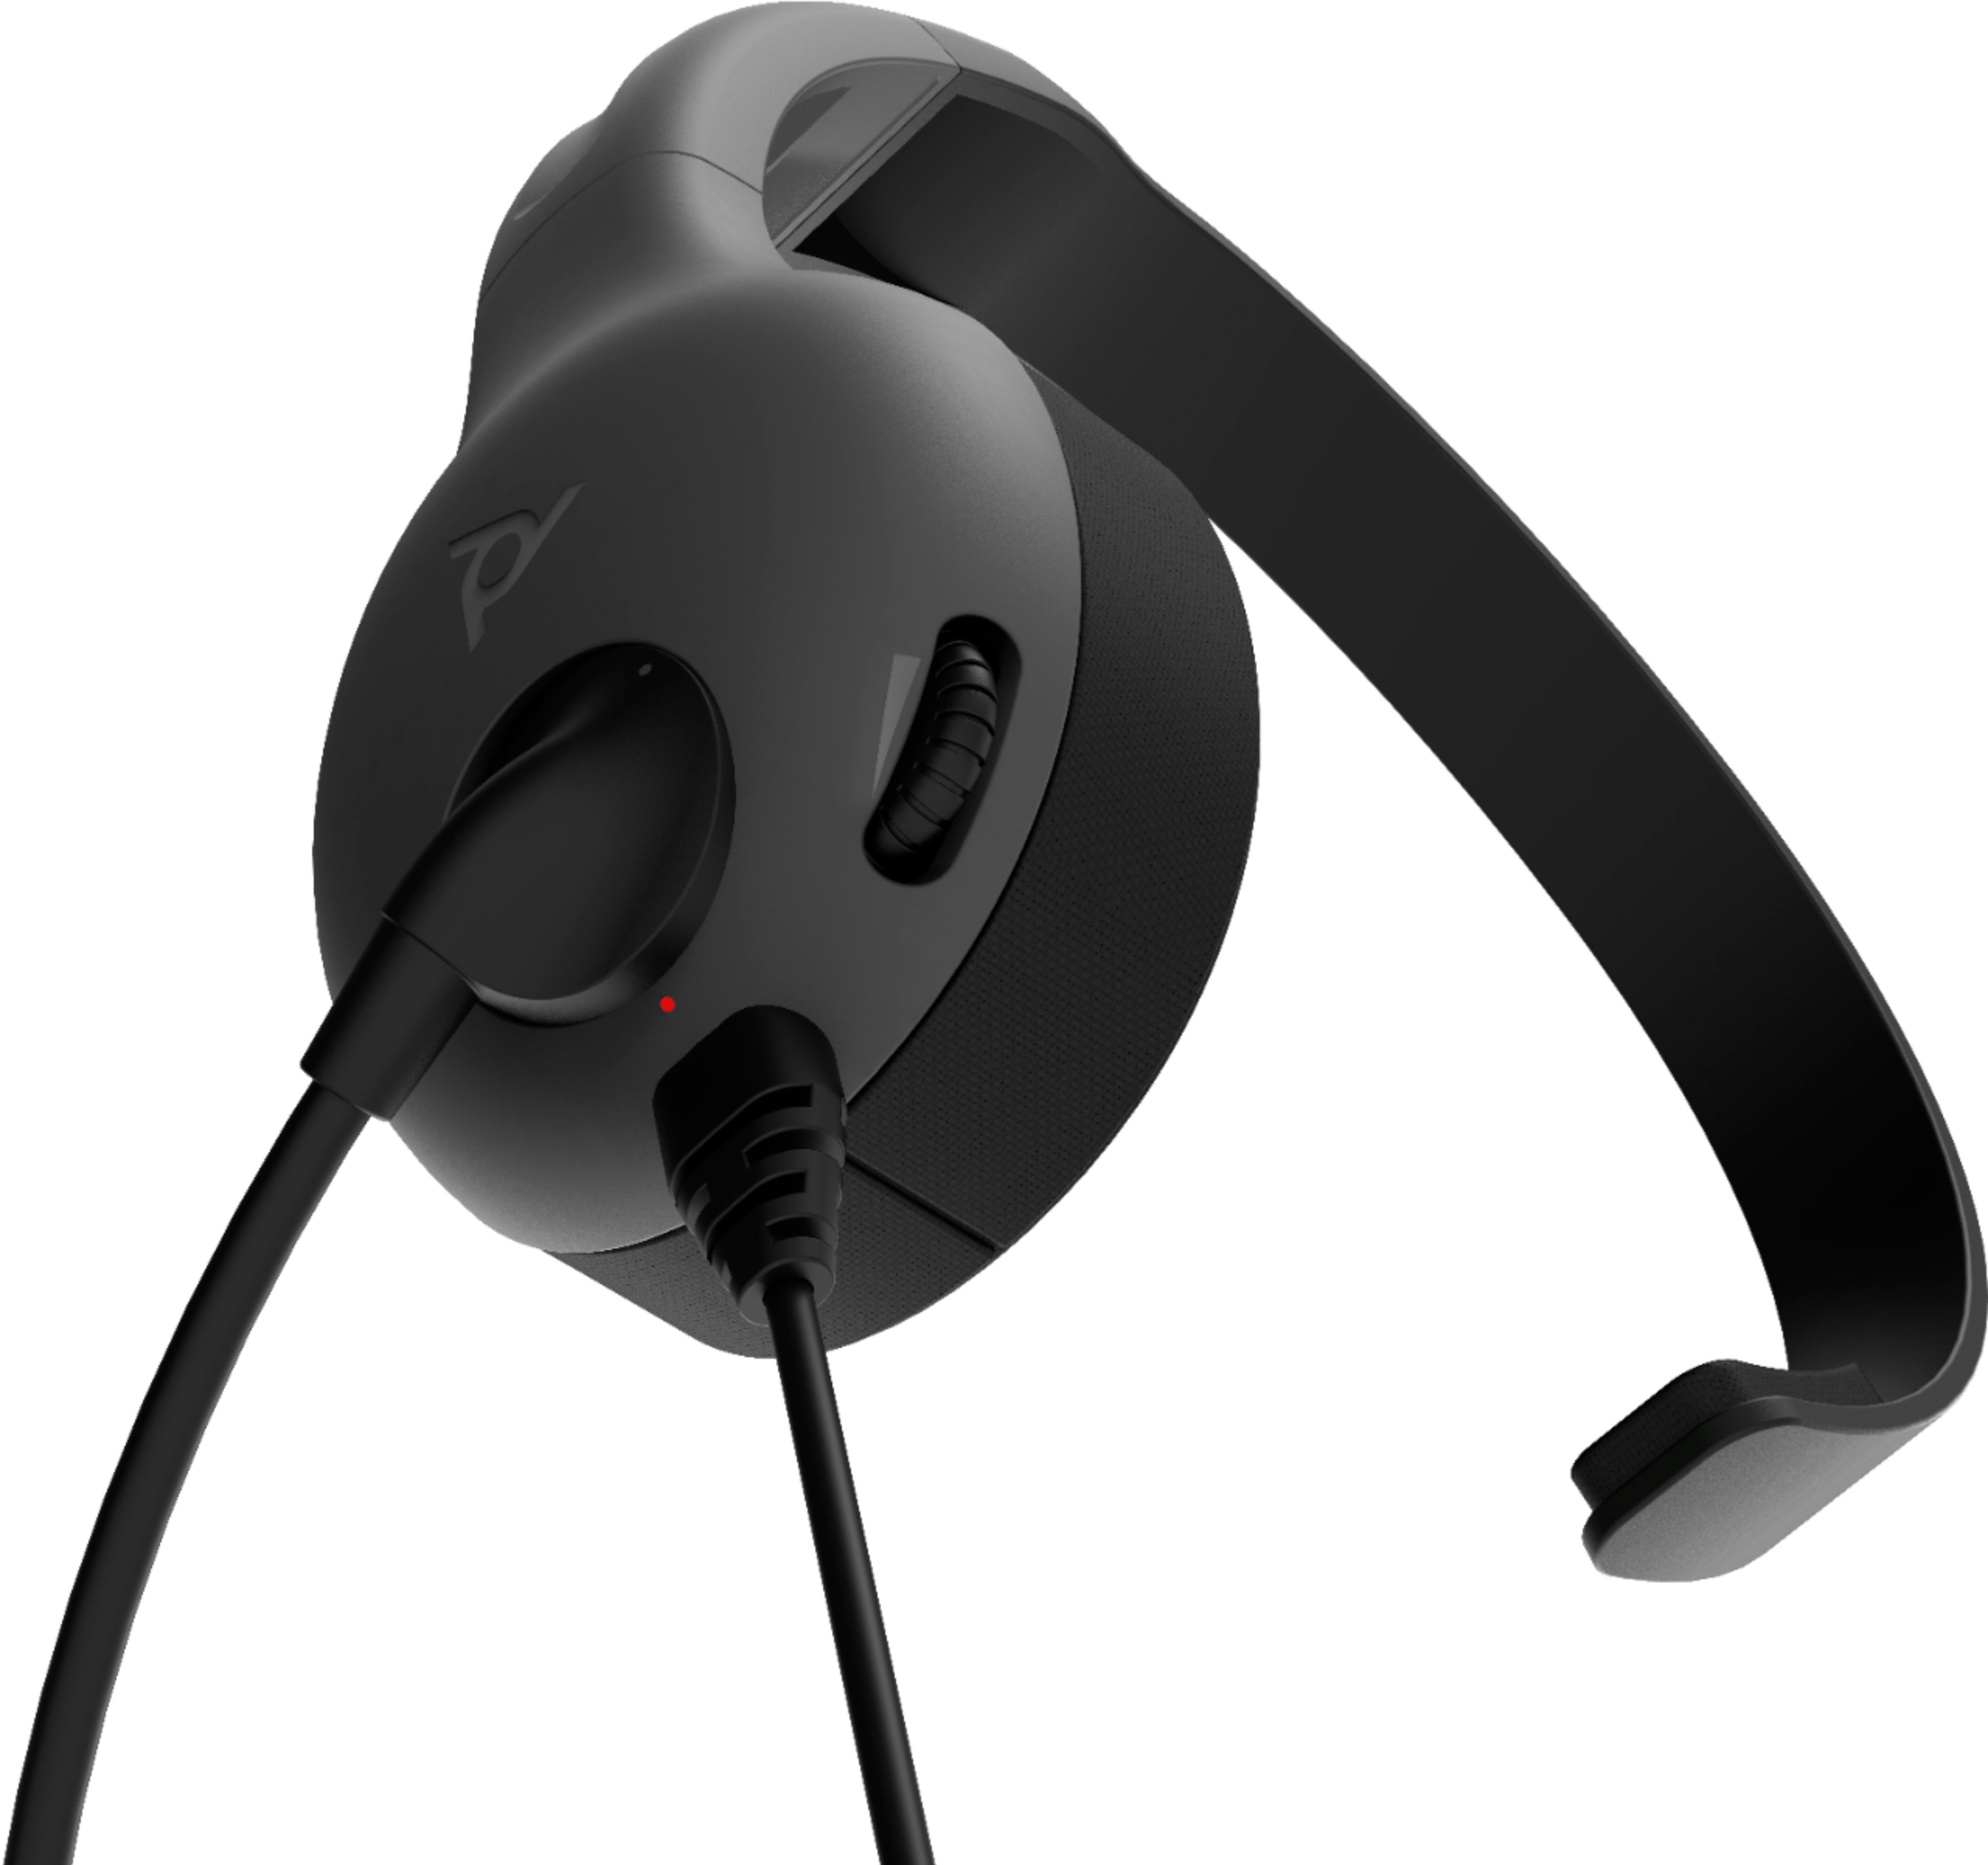 PDP LVL30 Wired Headset with Single-Sided One Ear Headphone for